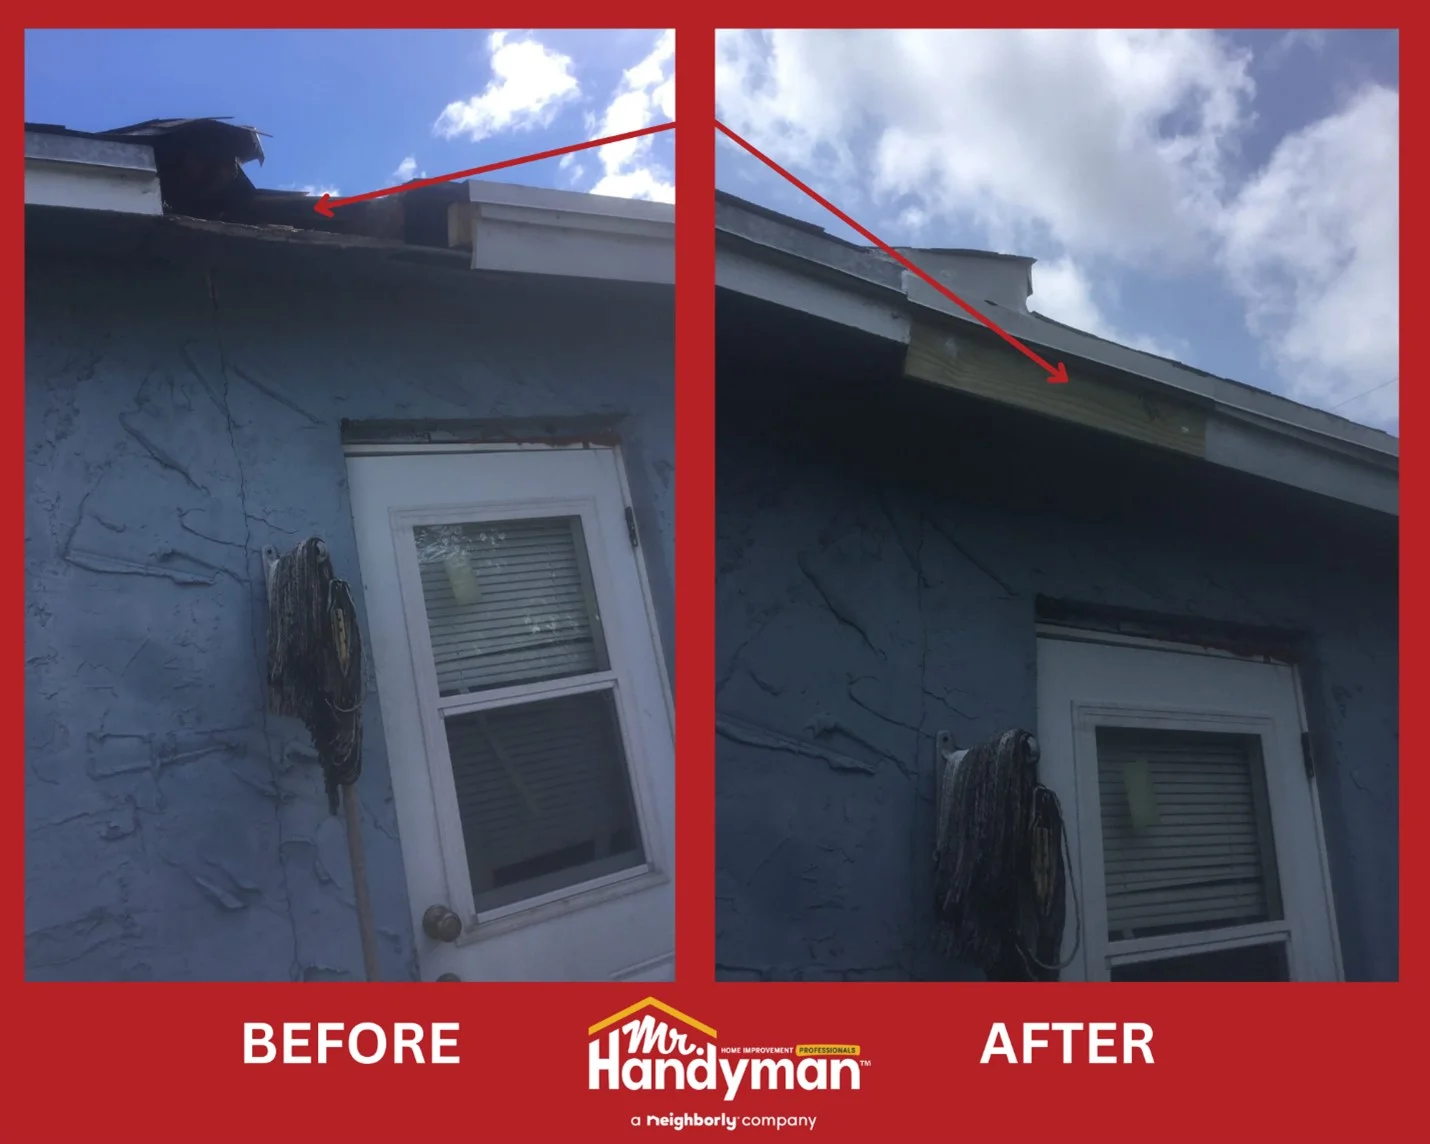 Before and after image of residential roofing soffit and fascia repair service.